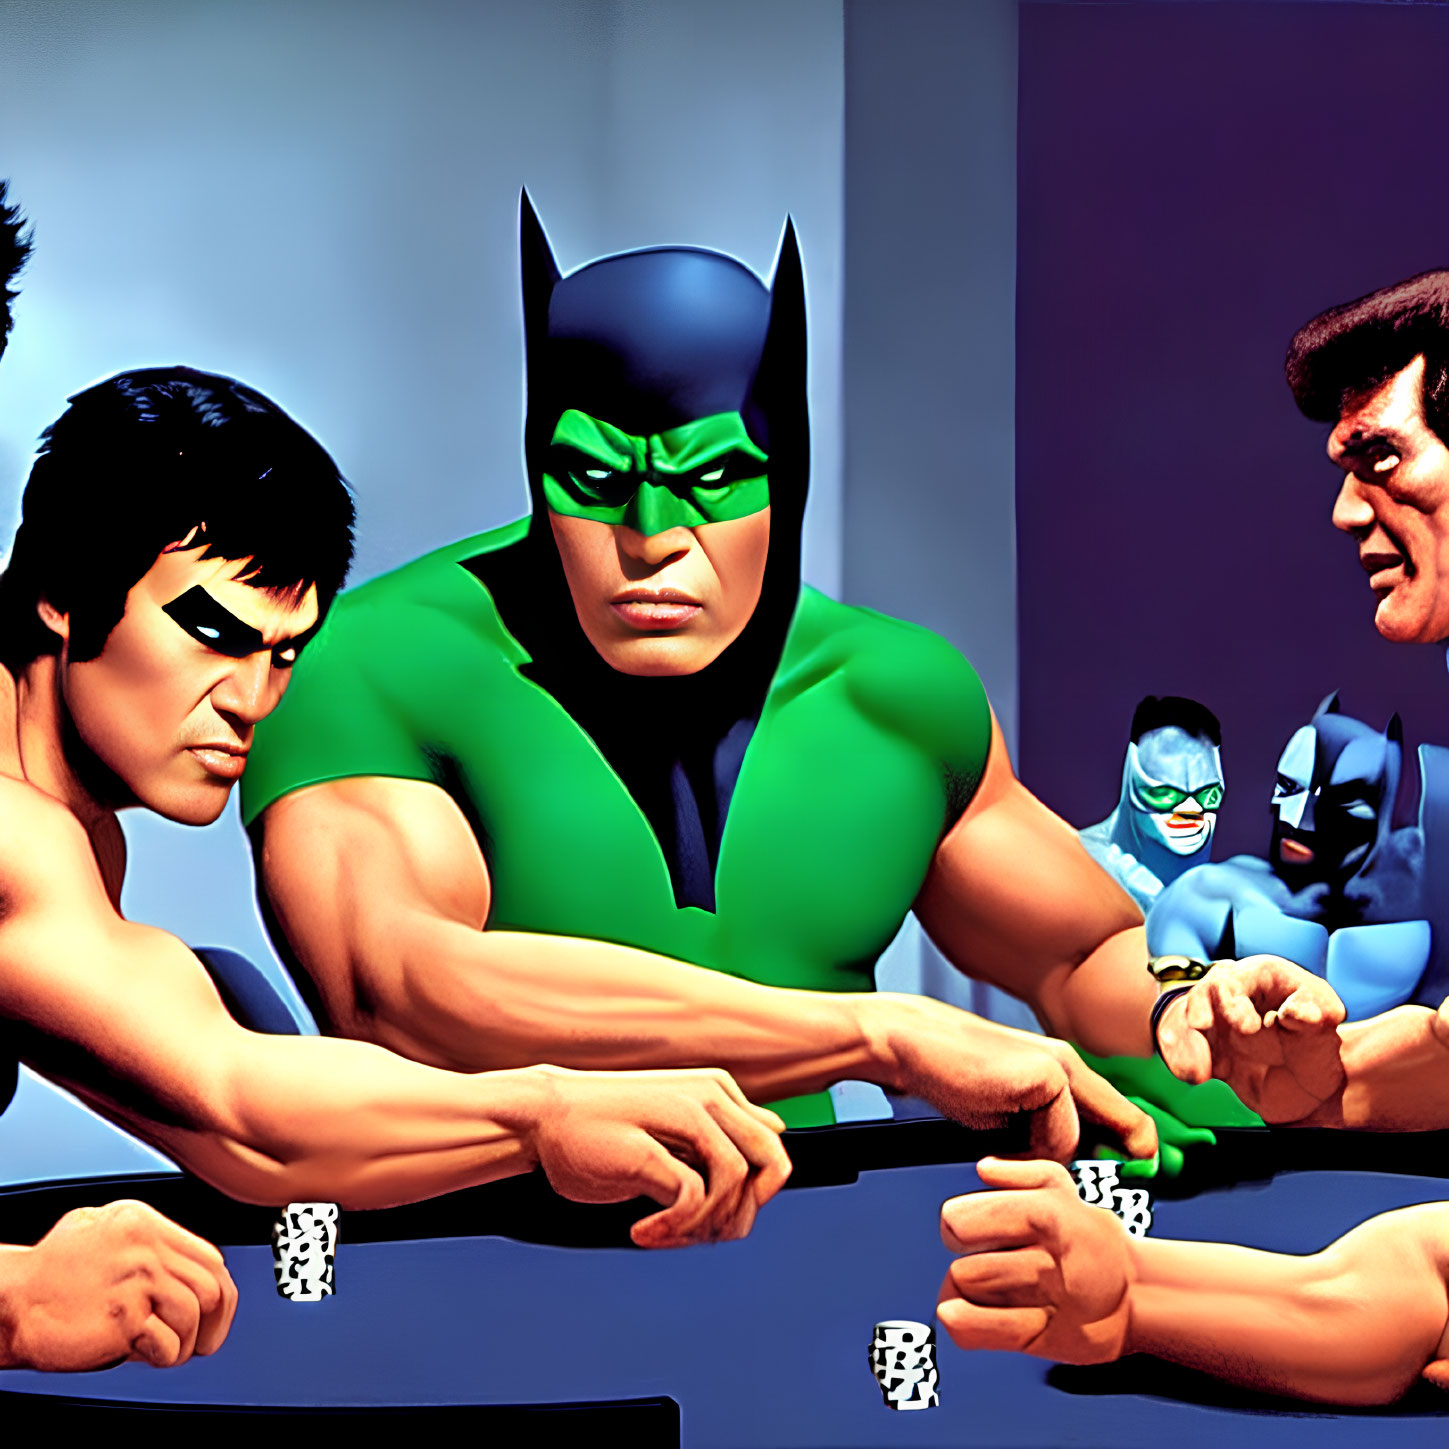 Famous superheroes in arm wrestling match with playing cards